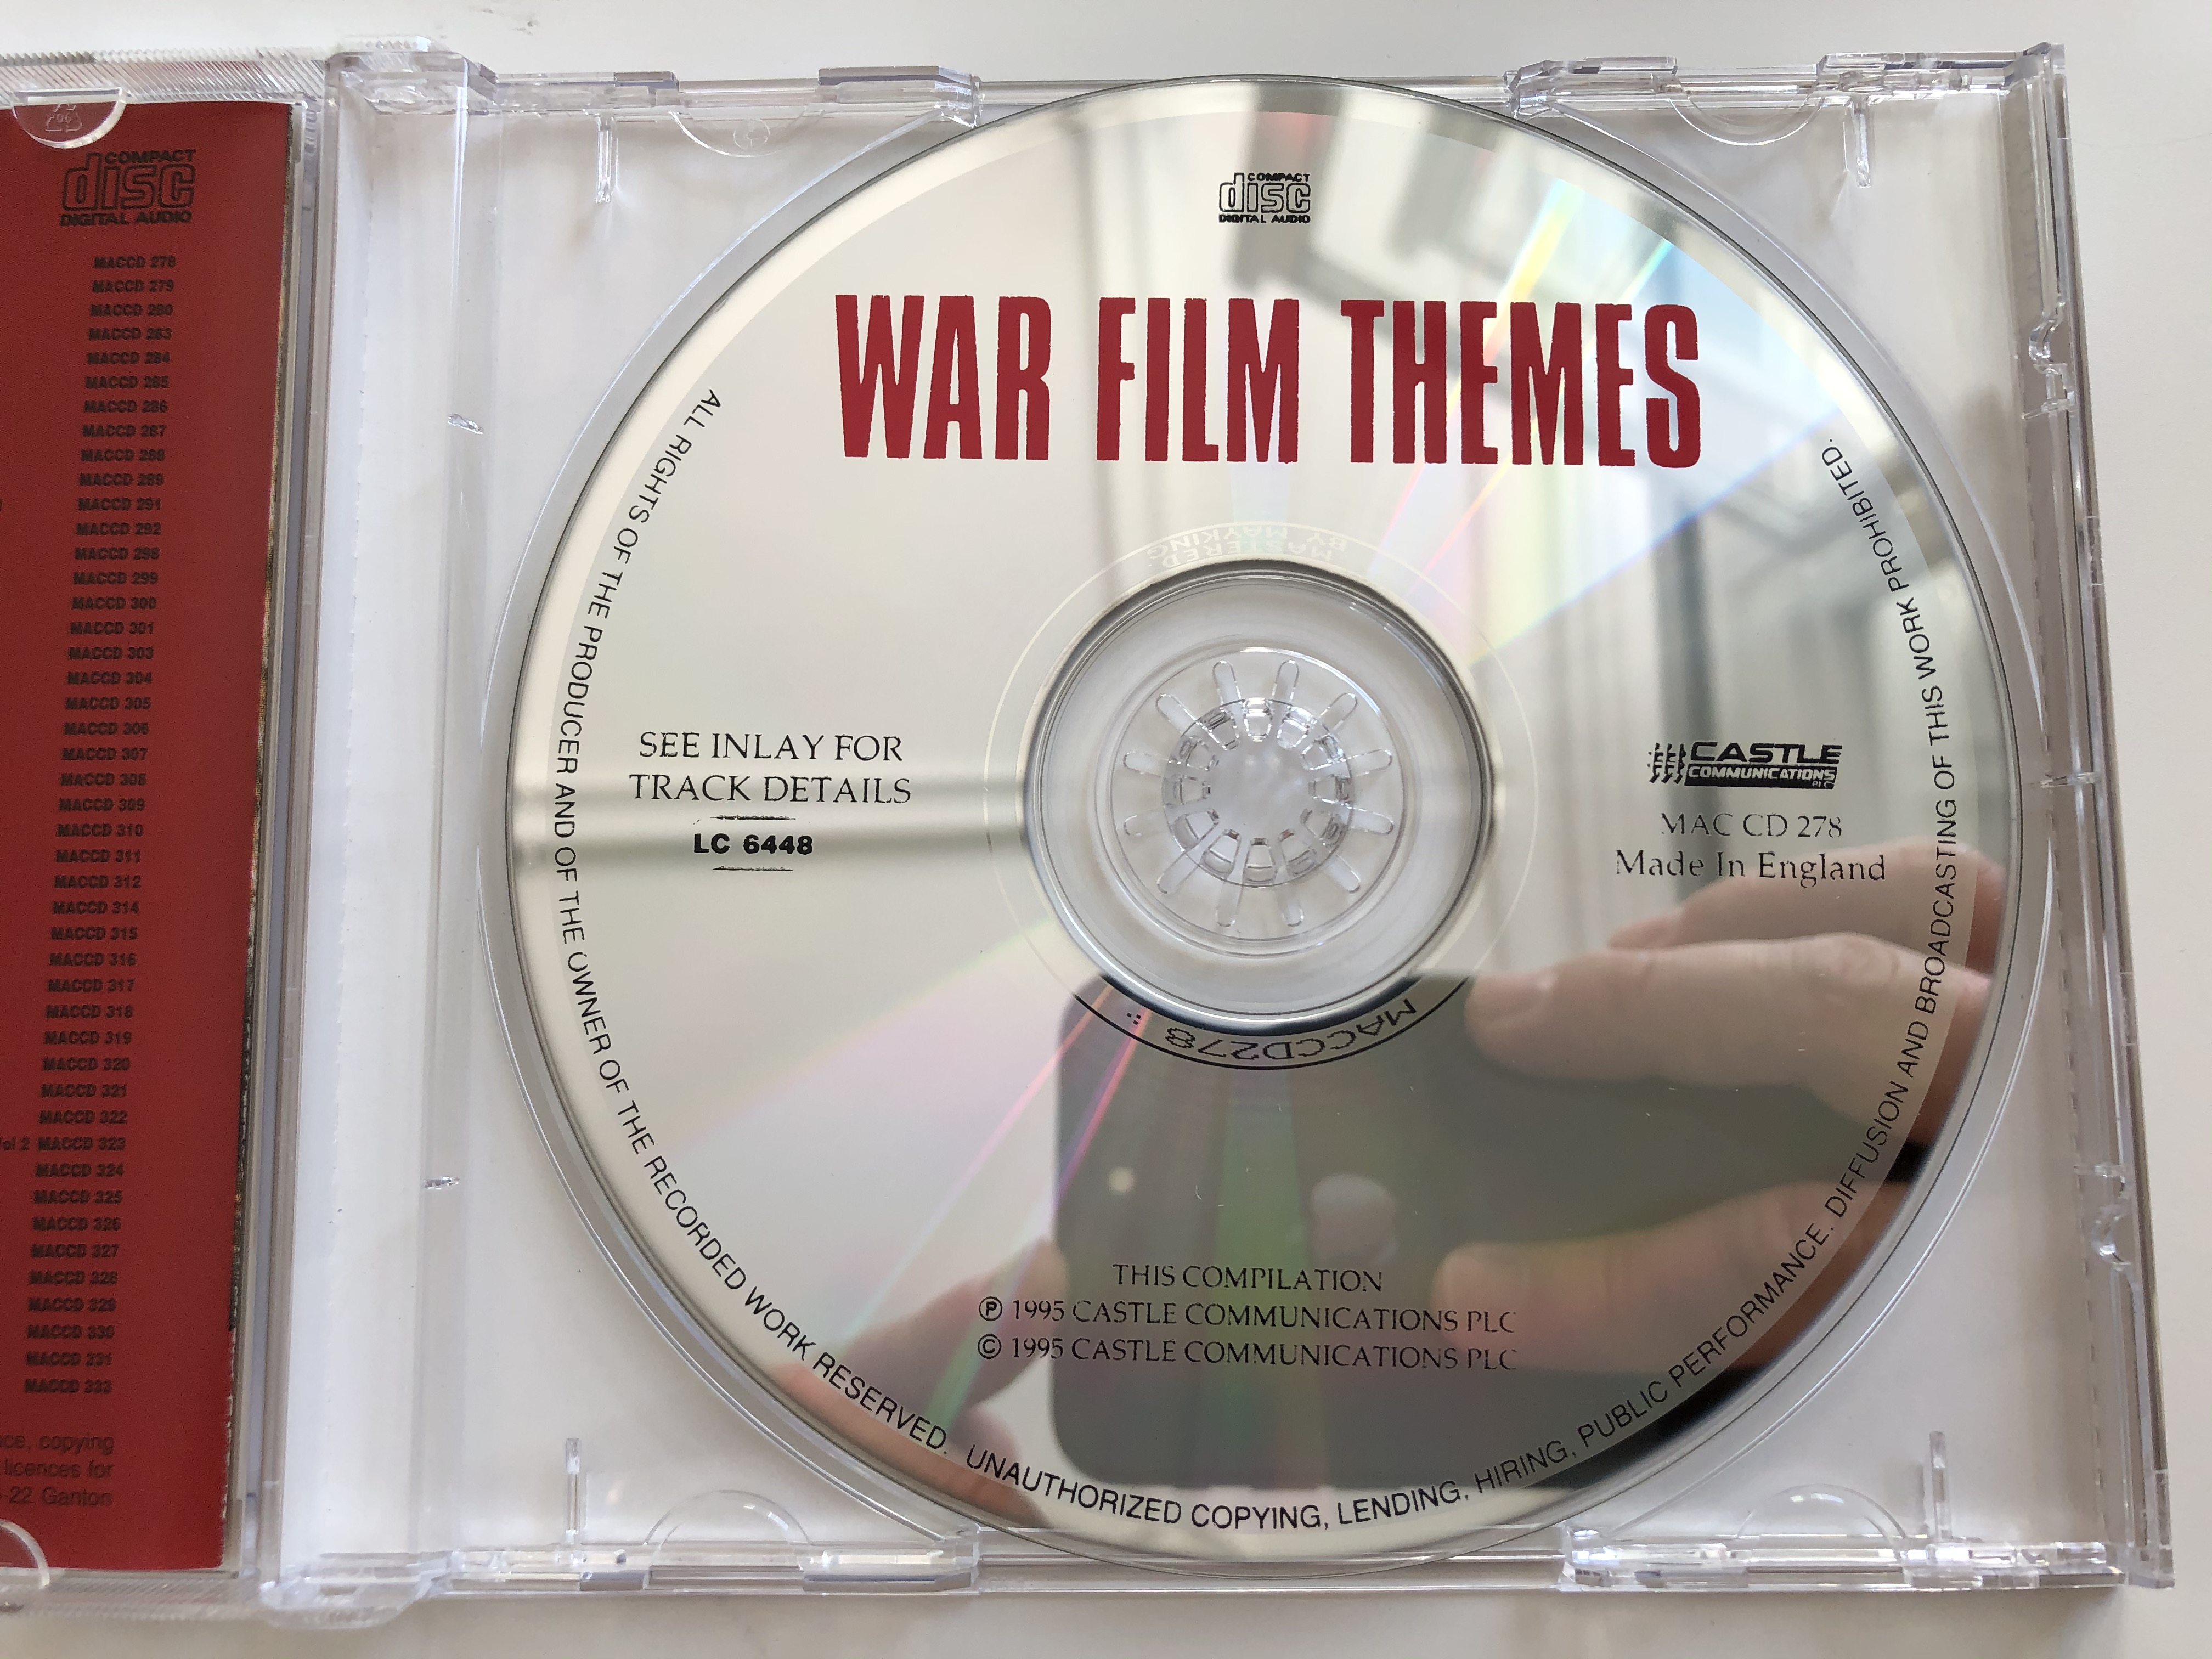 war-film-themes-including-themes-from-schindler-s-list-apocalypse-now-born-on-the-fourth-of-july-good-morning-vietnam-top-gun-platon-castle-communications-audio-cd-1995-mac-cd-278-3-.jpg